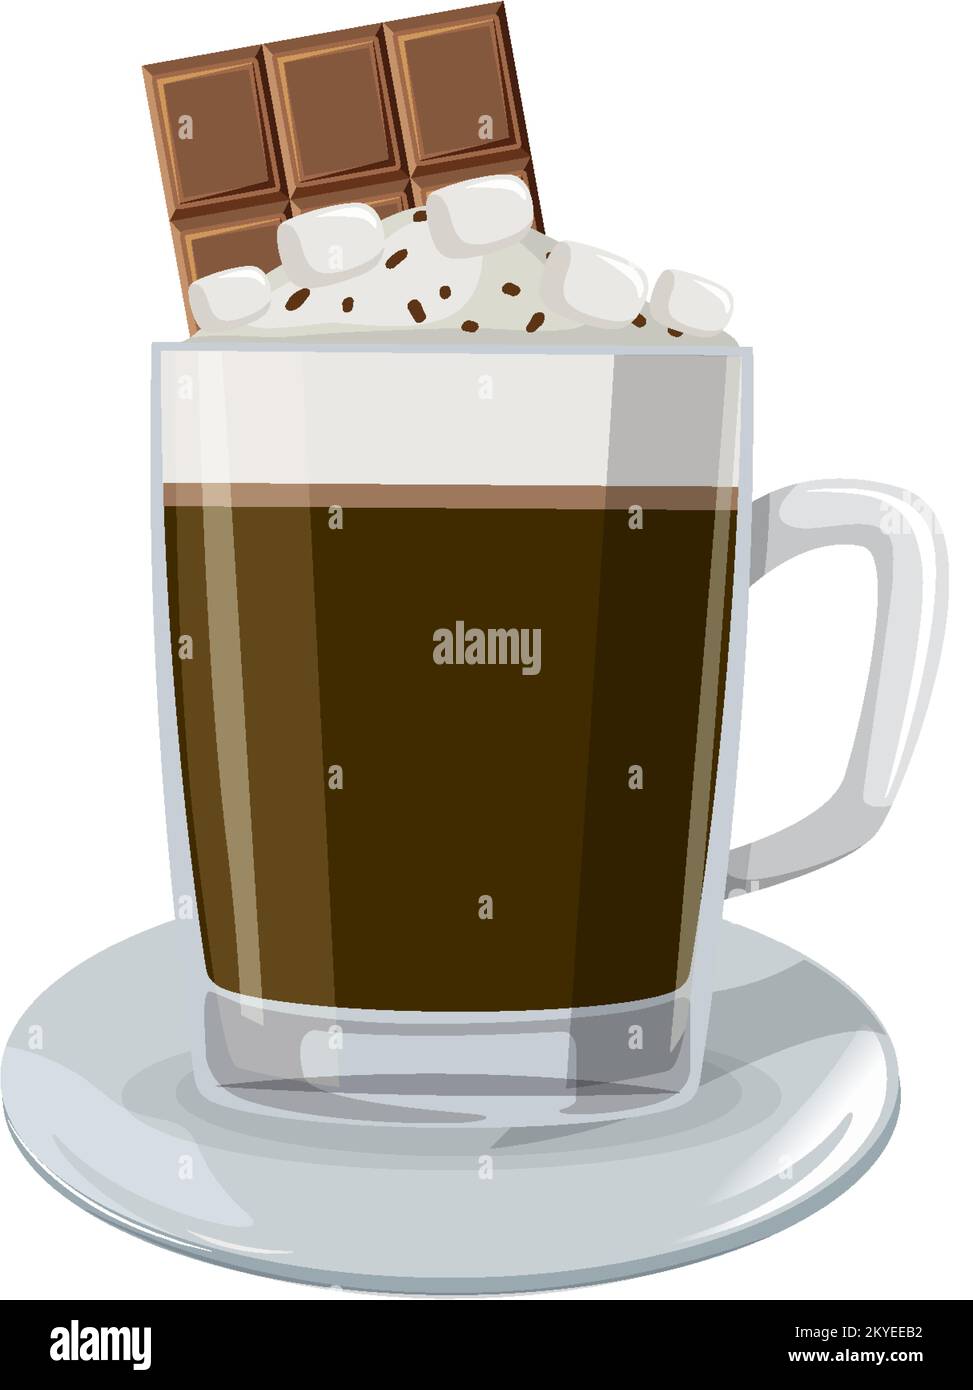 Hot chocolate with whipped cream illustration Stock Vector